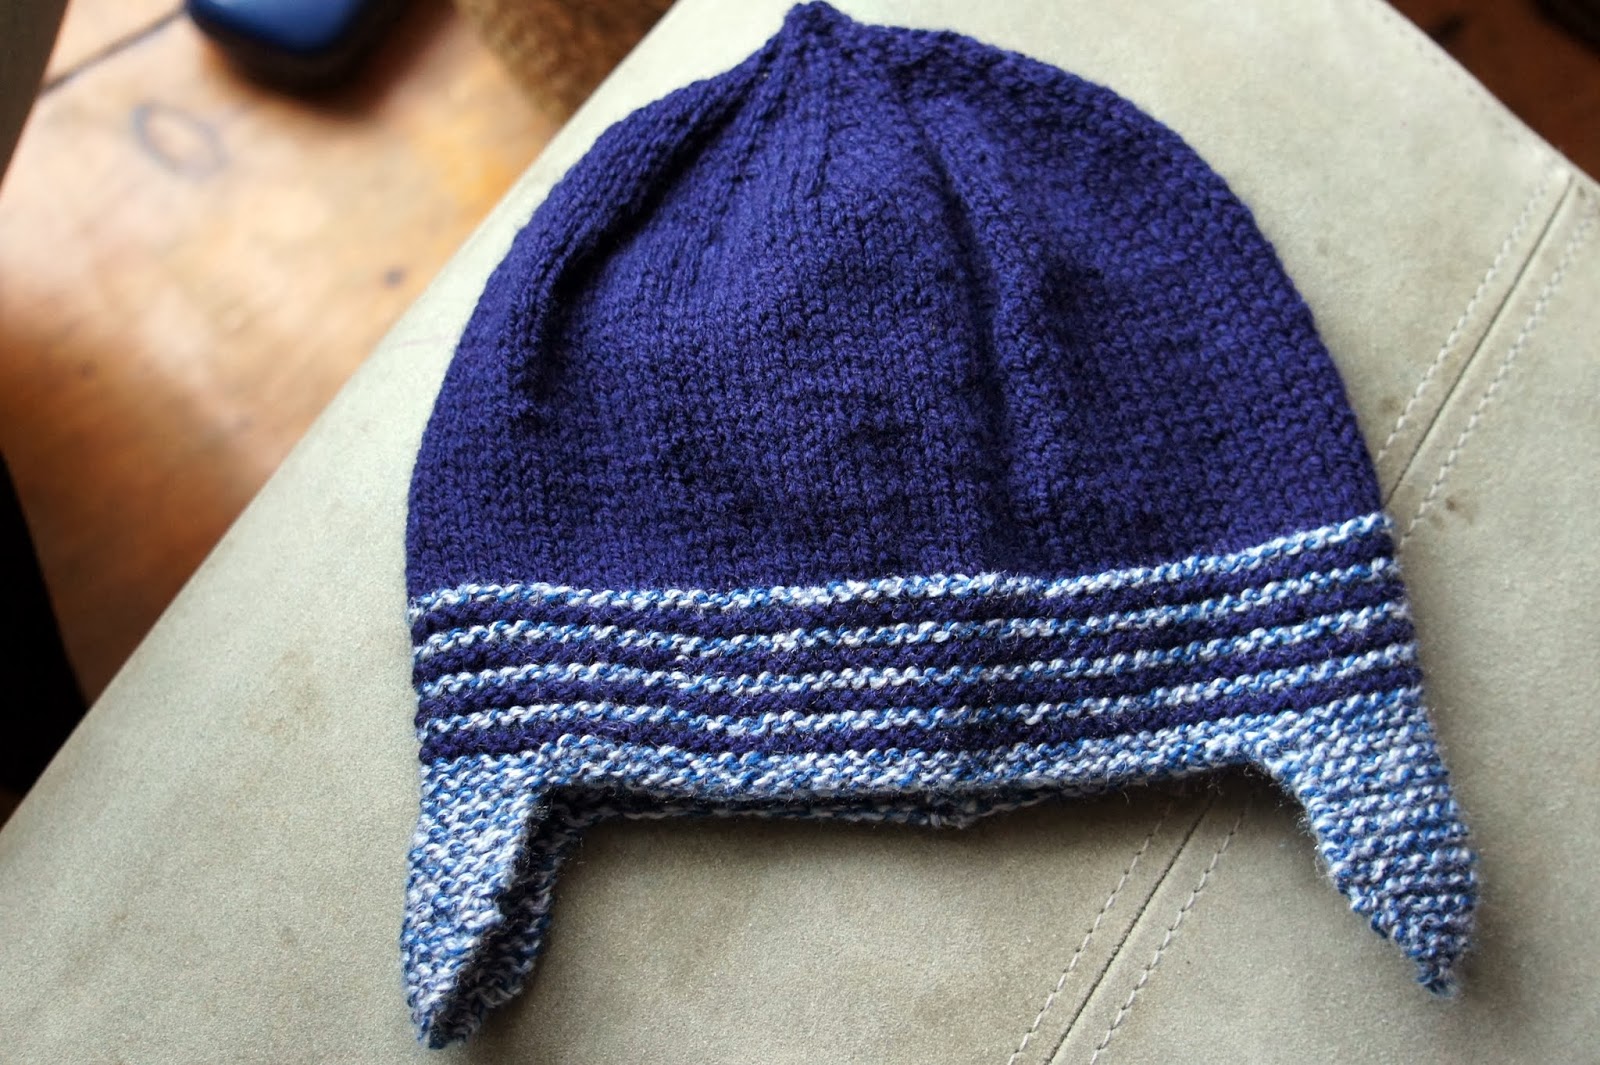 GRANNY'S WORLD: Knitting Projects